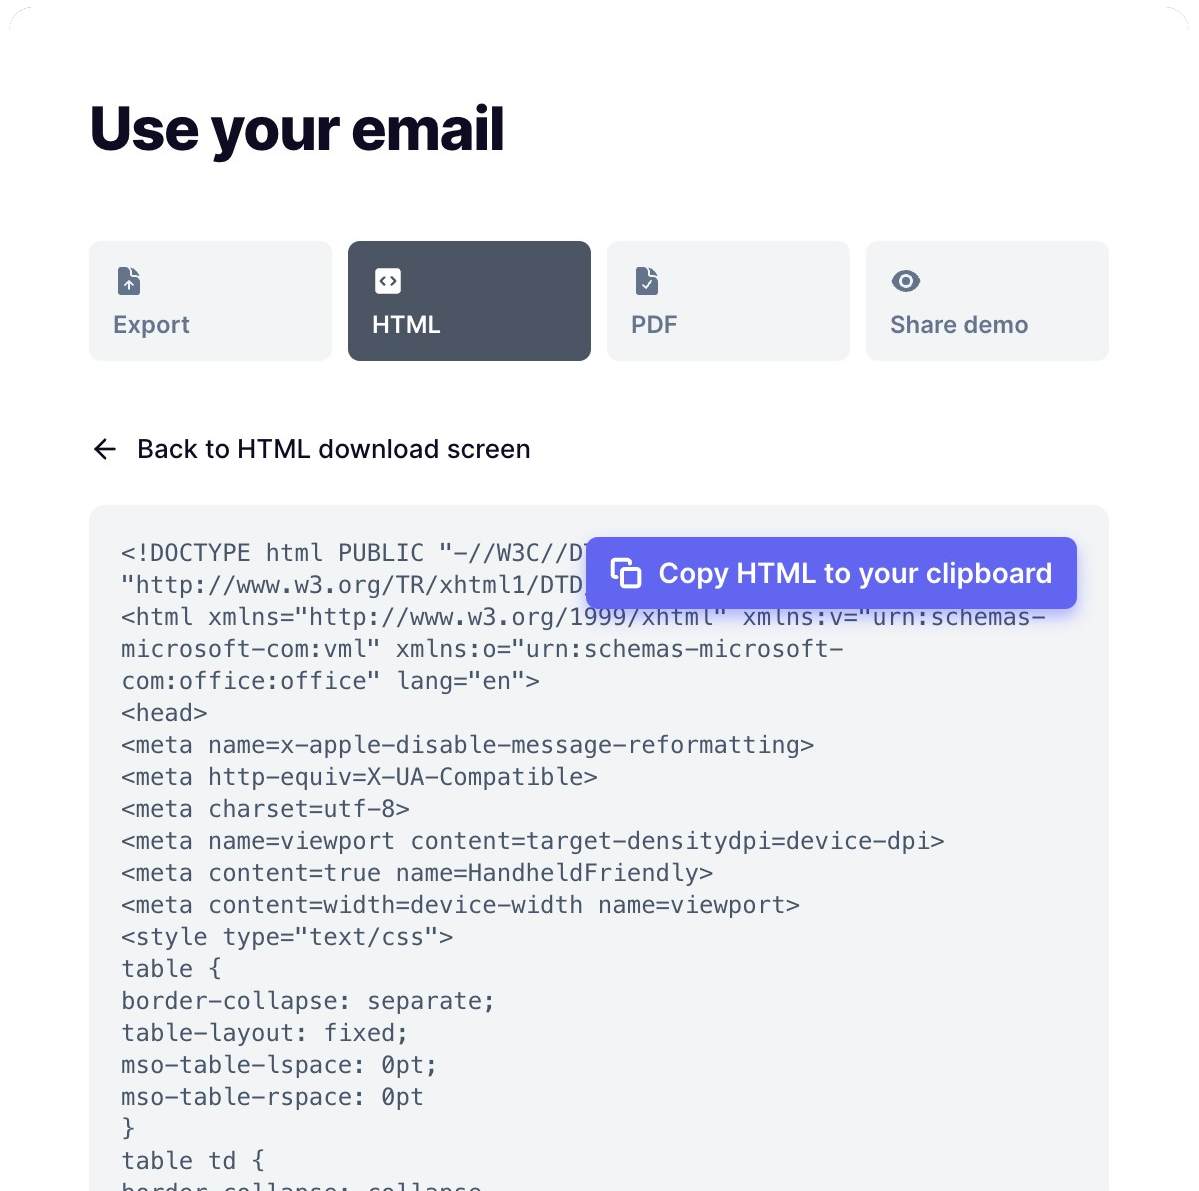 Let Tabular generate HTML for your email